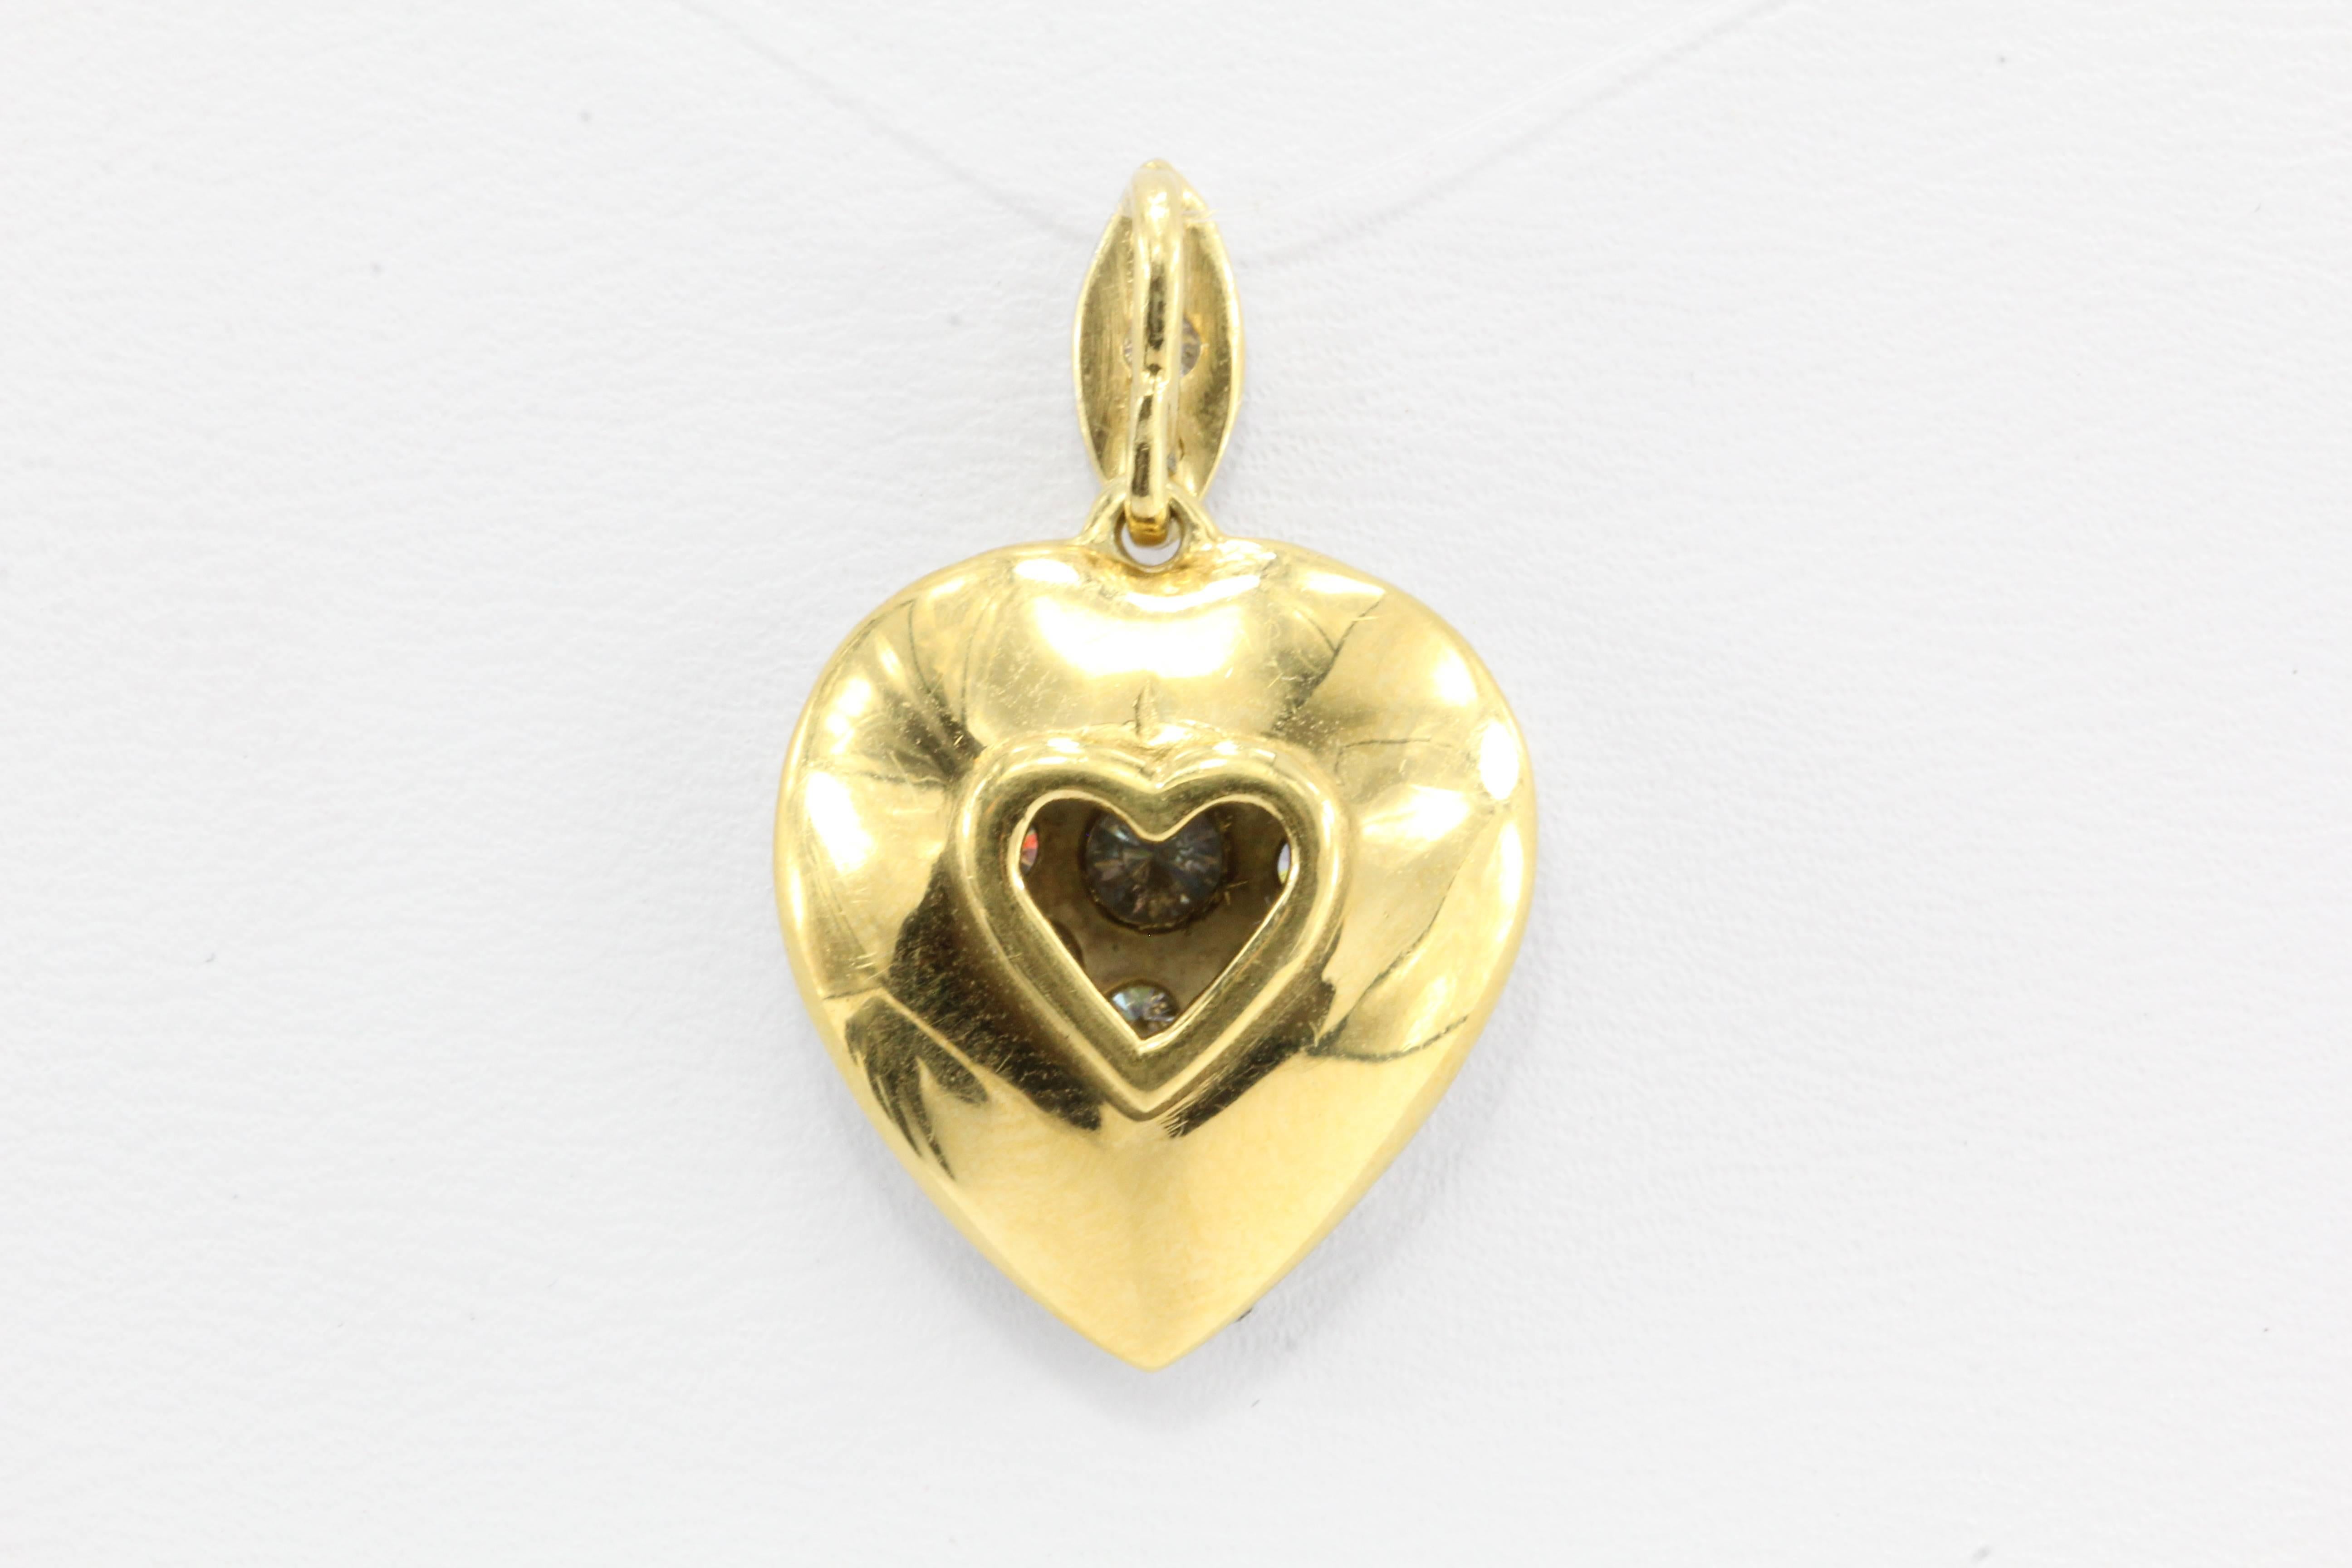 An Edwardian token of affection in the form of a diamond confection in one precious pendant. The heart features 1.5 carats of Old European Cut diamonds that bring such light and joy to this piece. 

Era: Edwardian

Composition: 18K Yellow Gold with